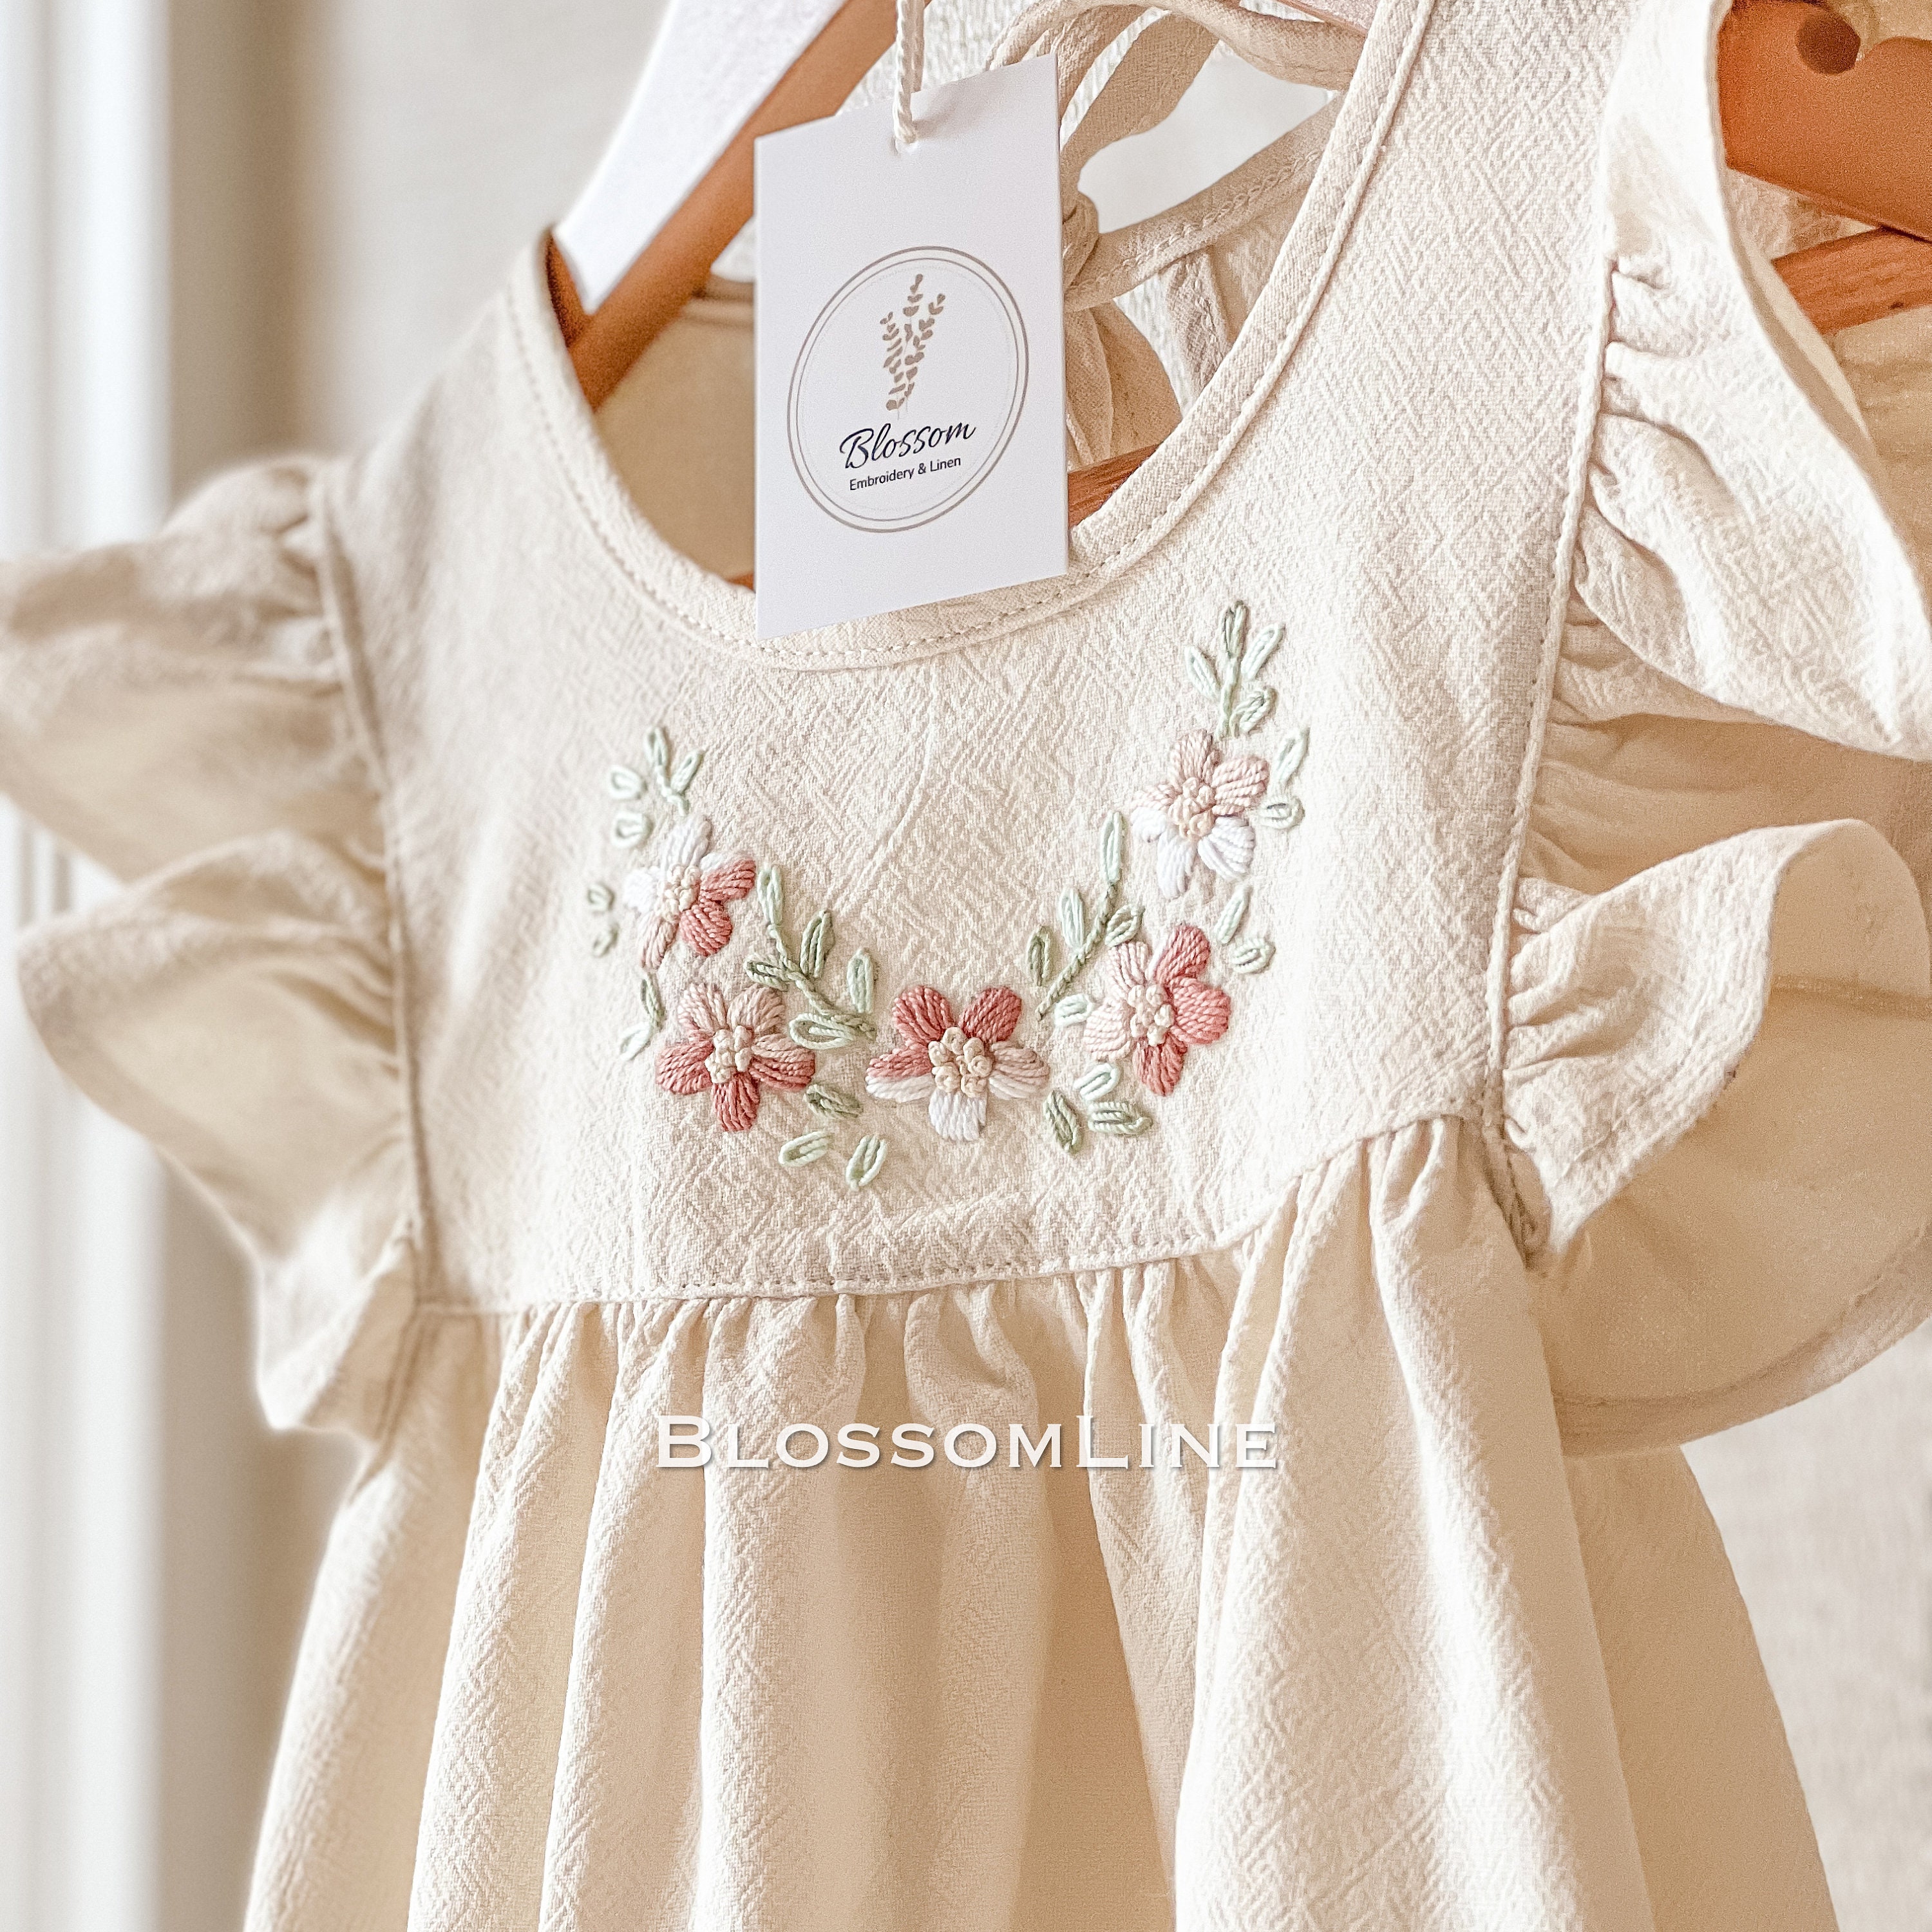 Girls Linen Dress Handmade Embroidery Floral Design Special - Etsy